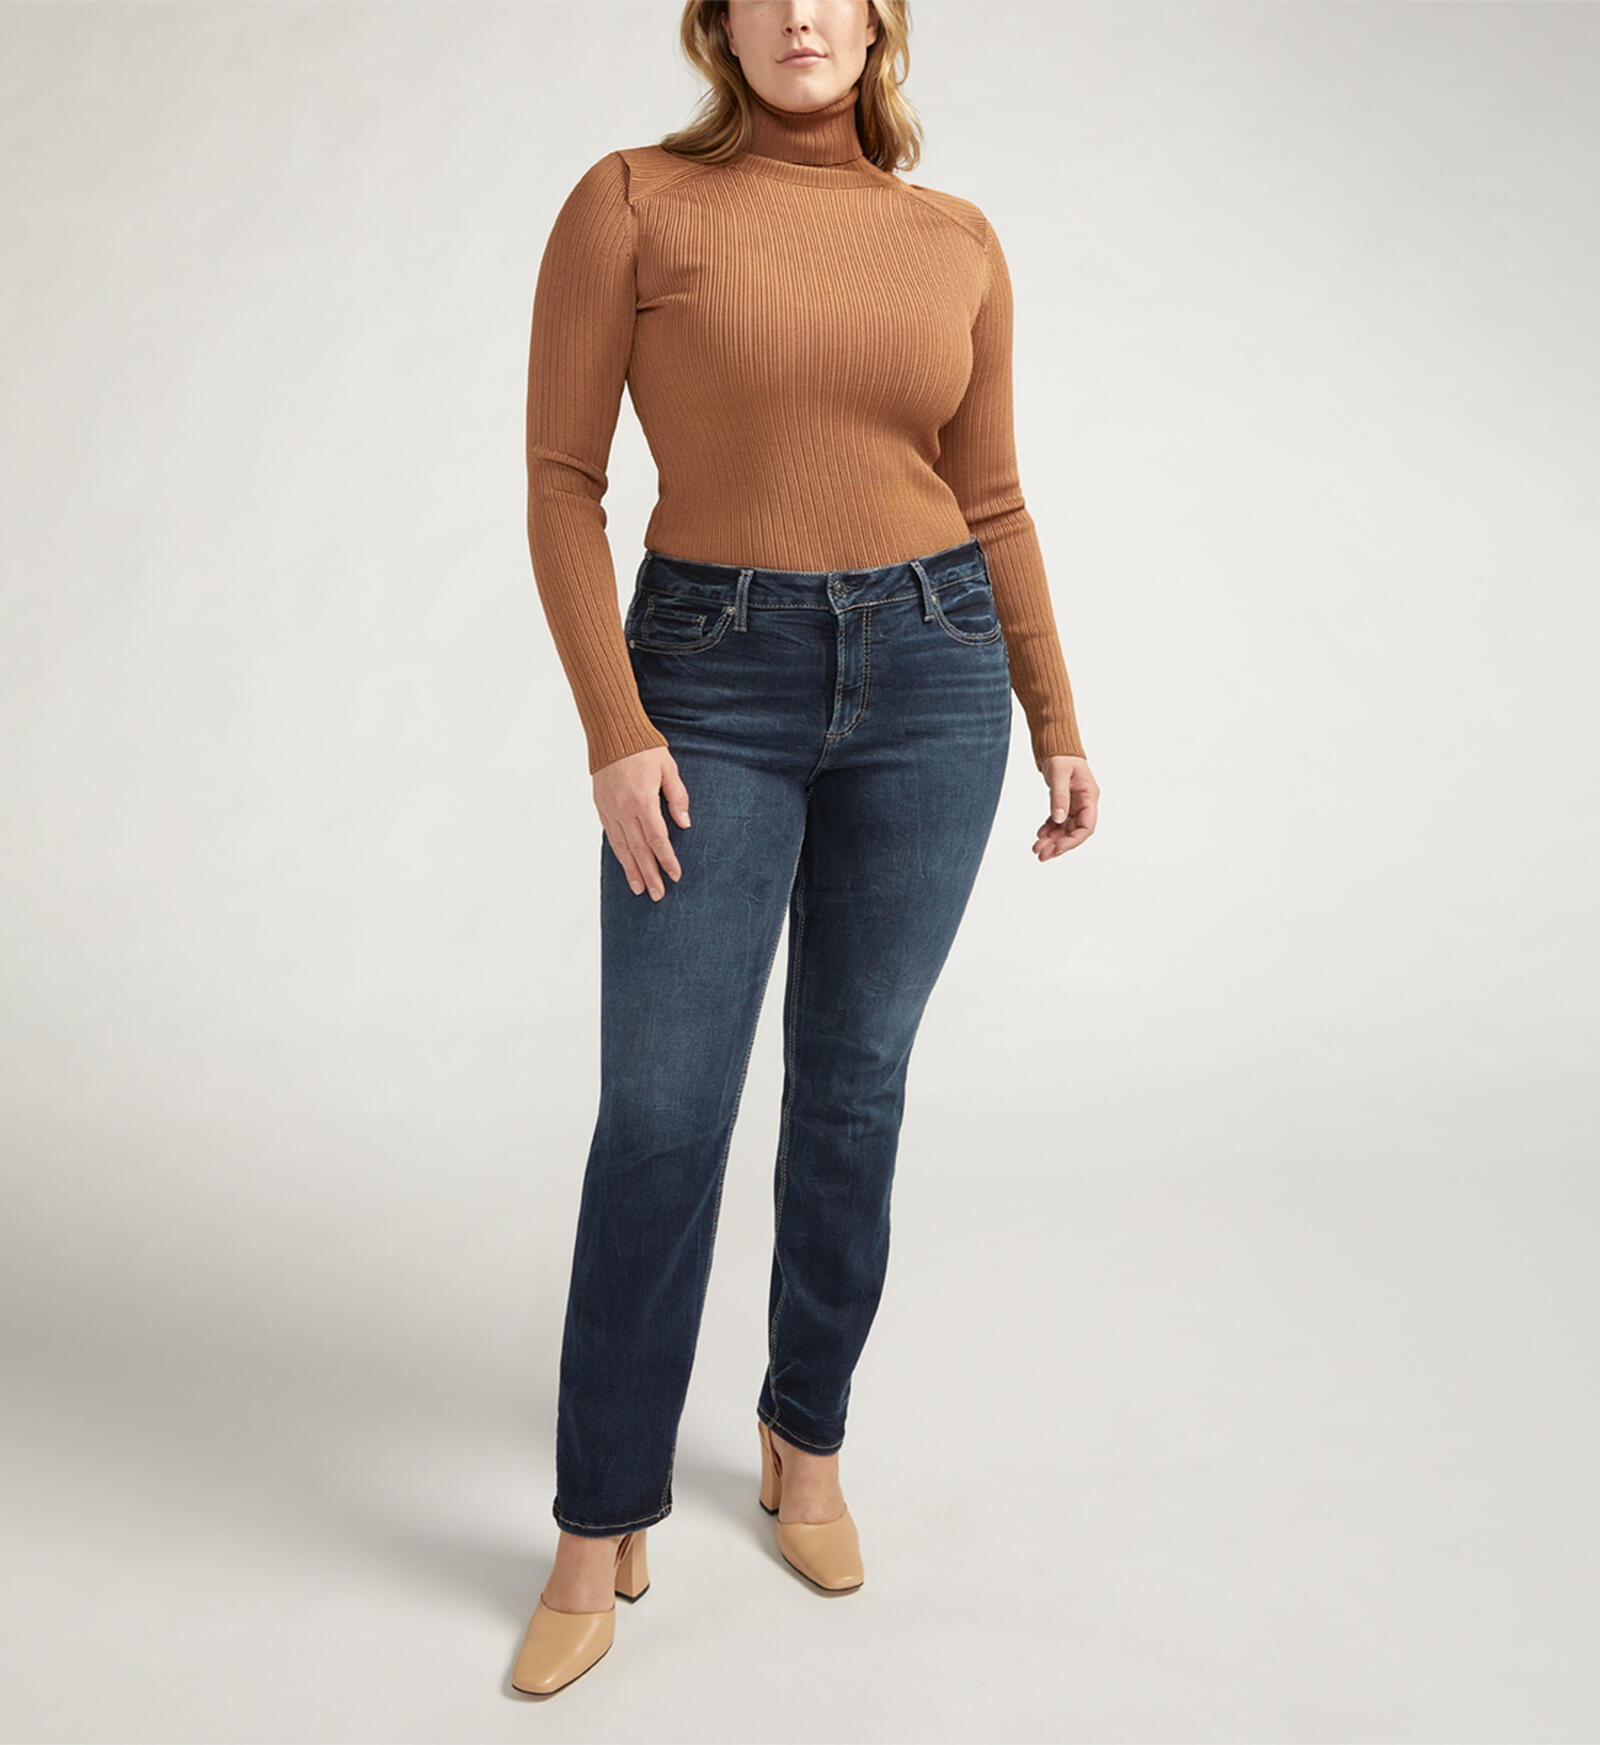 Buy Suki Mid Rise Straight Leg Jeans Plus Size for USD 88.00